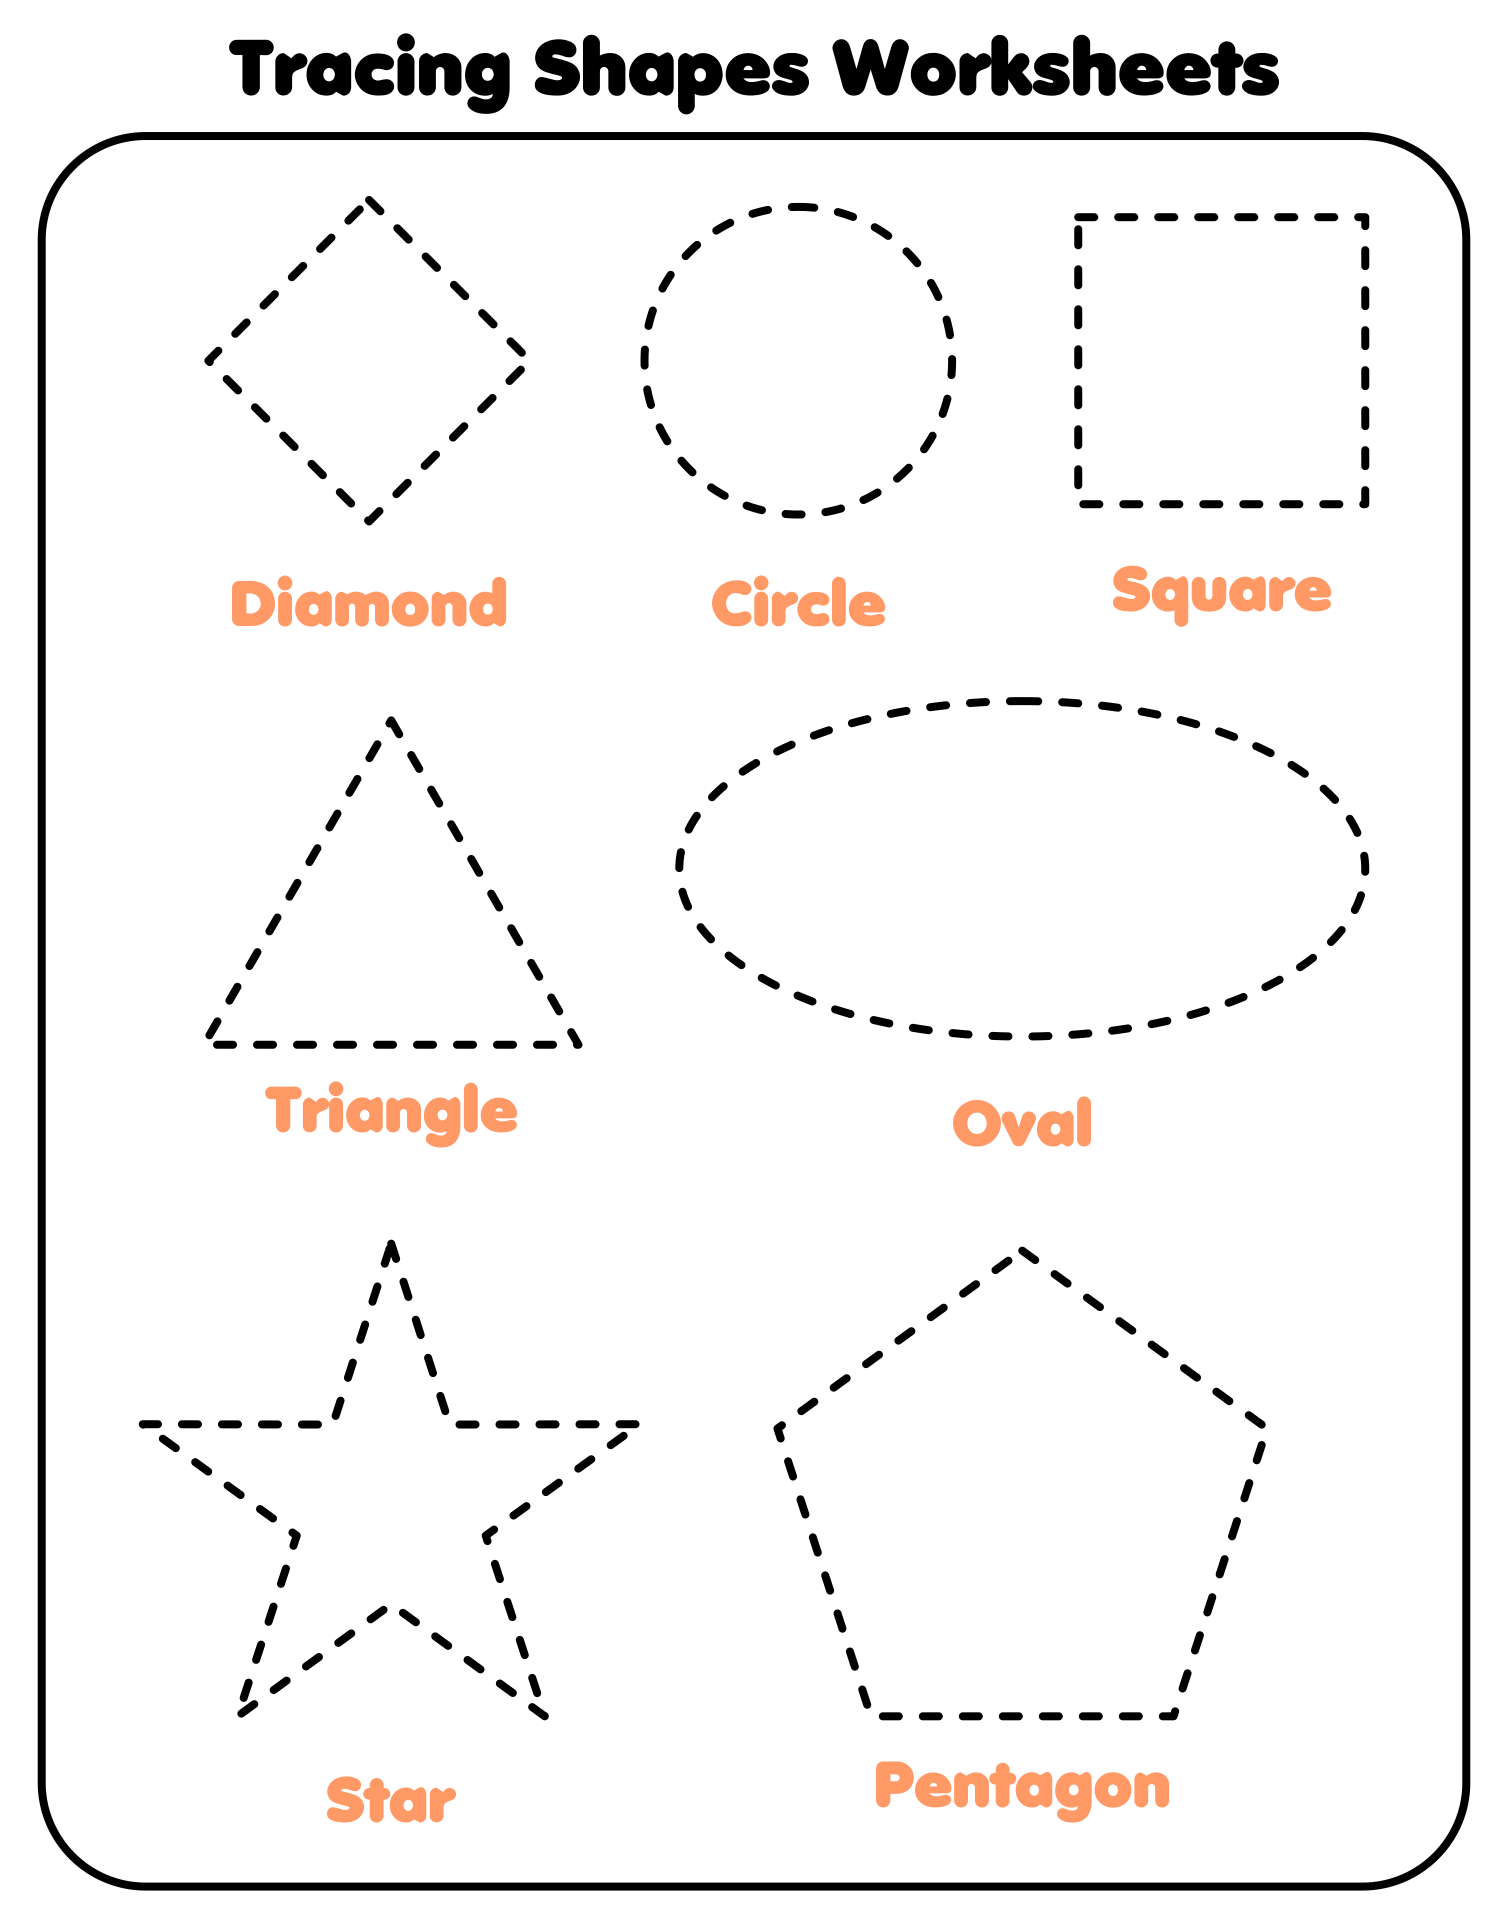 free-colorful-printable-tracing-worksheets-for-kids-kids-play-and-create